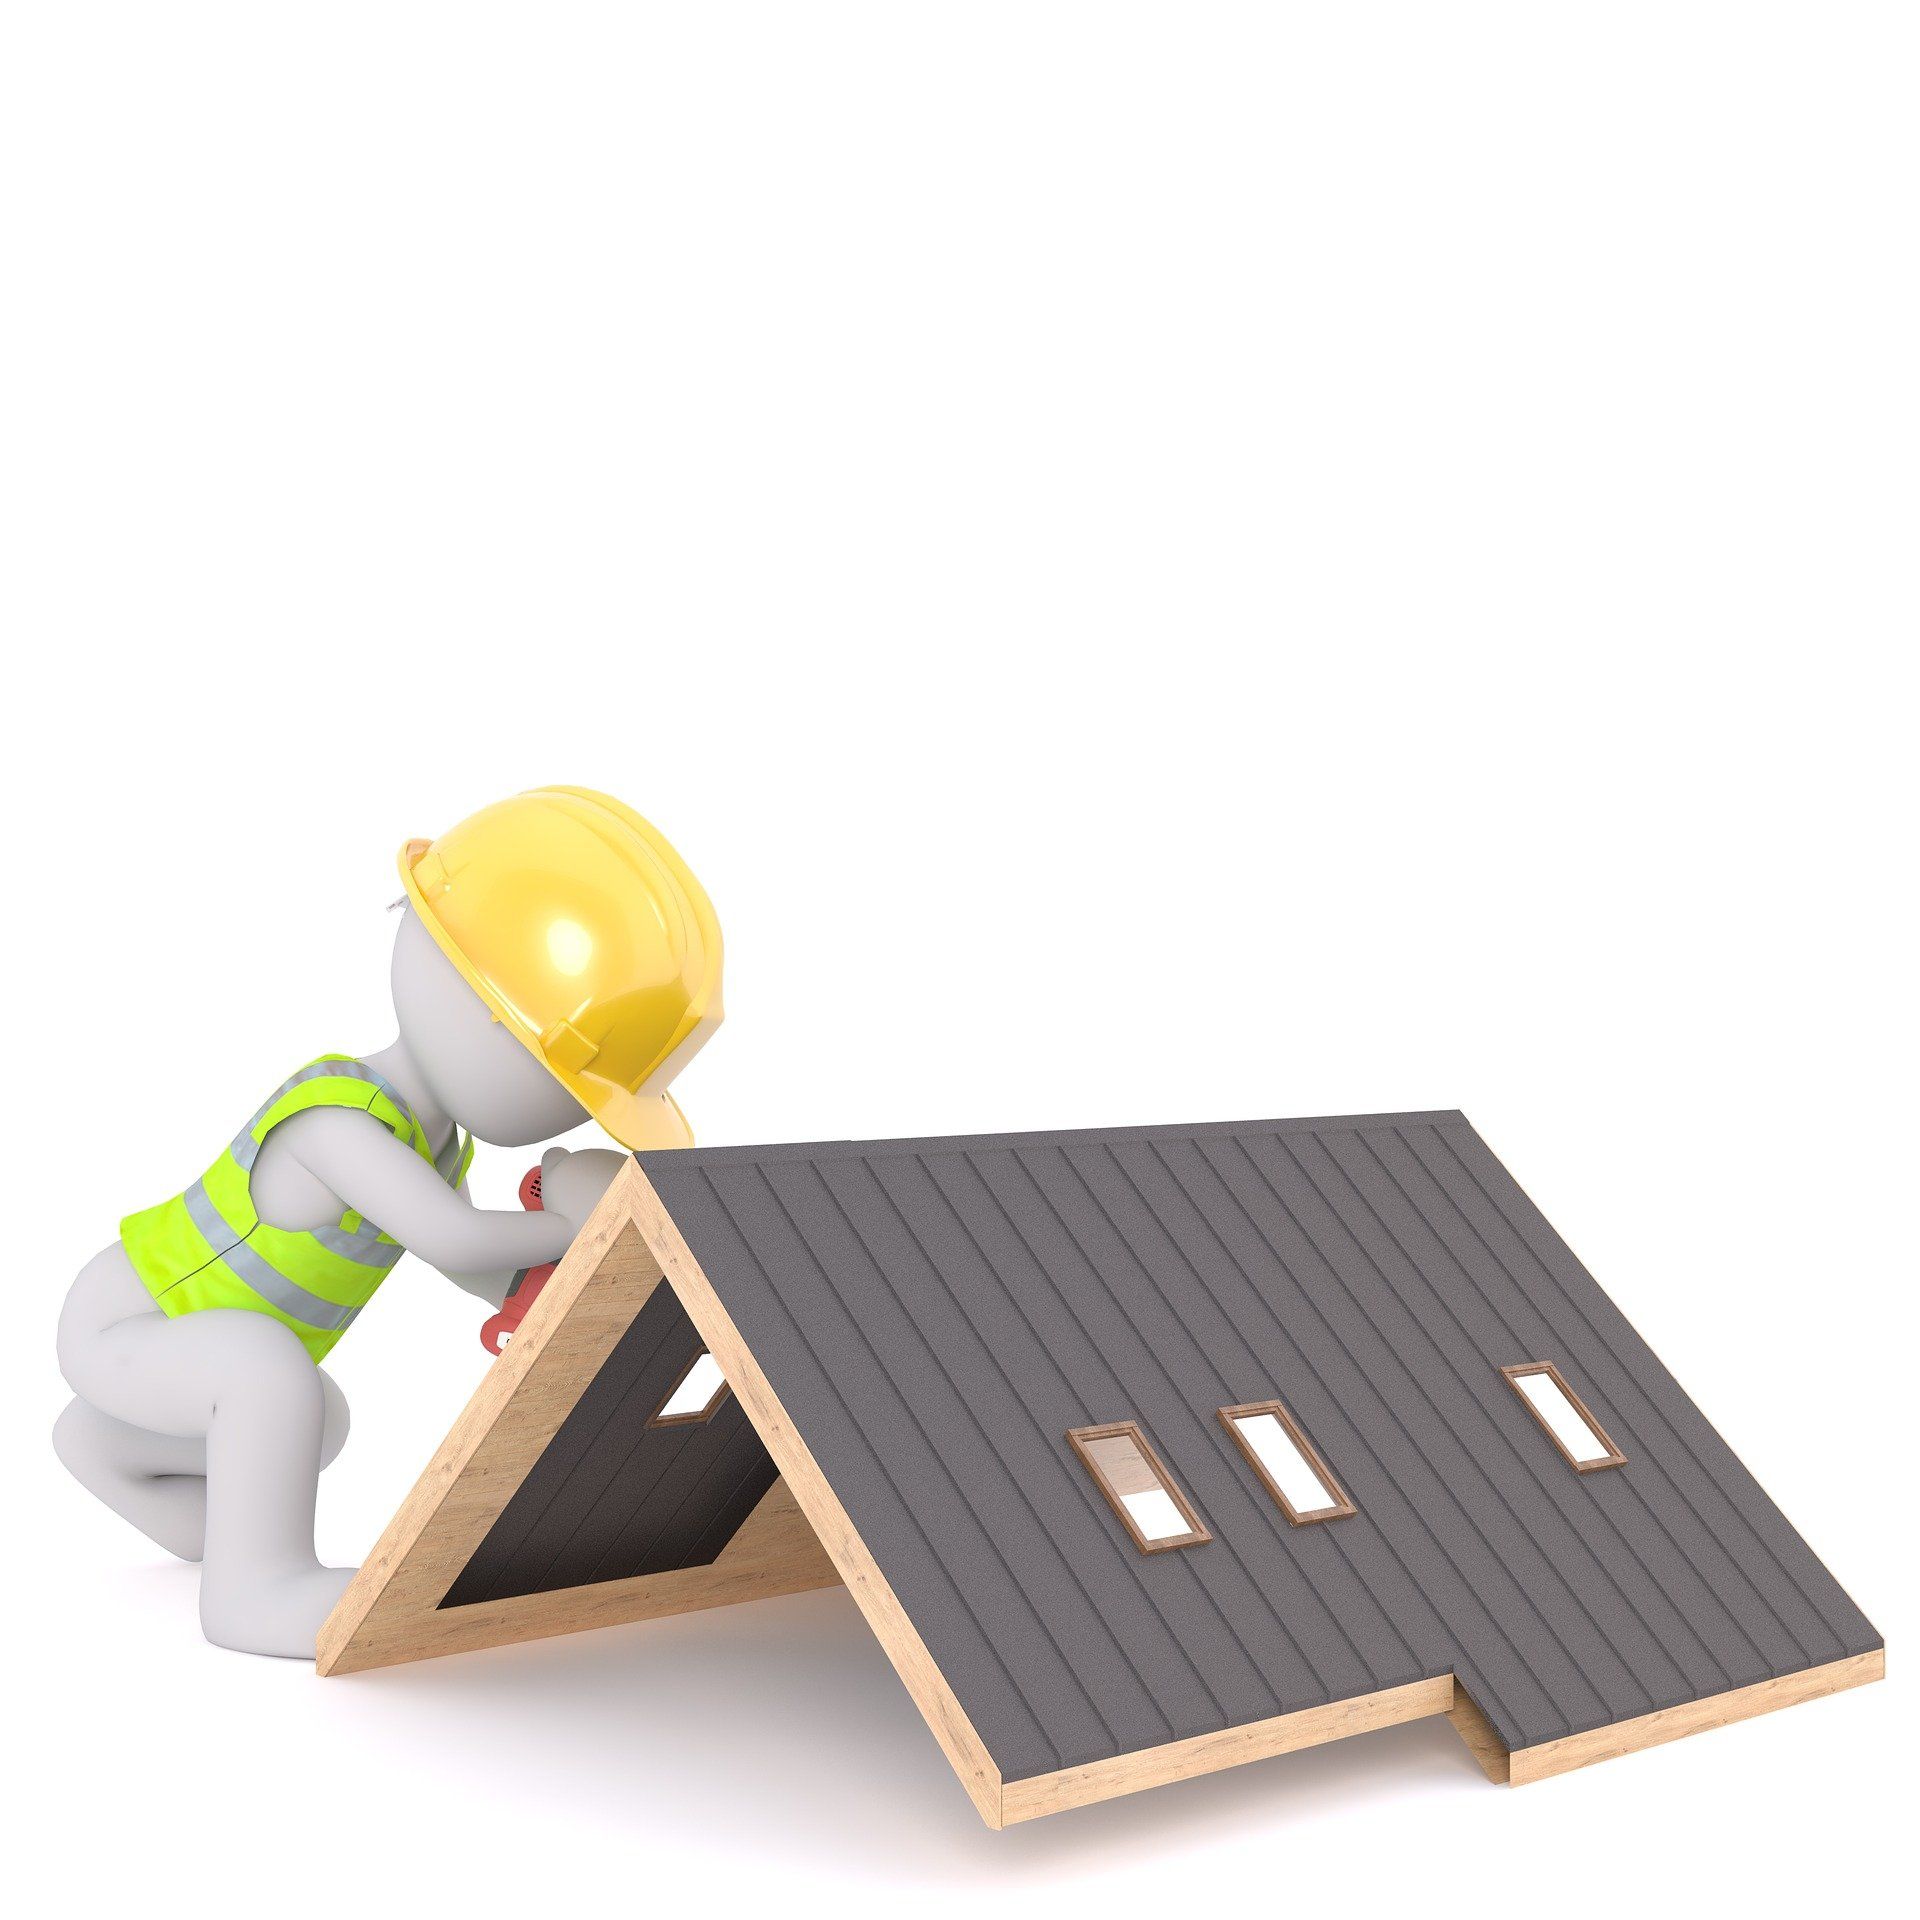 3 Important Qualities to look for in a Roofer